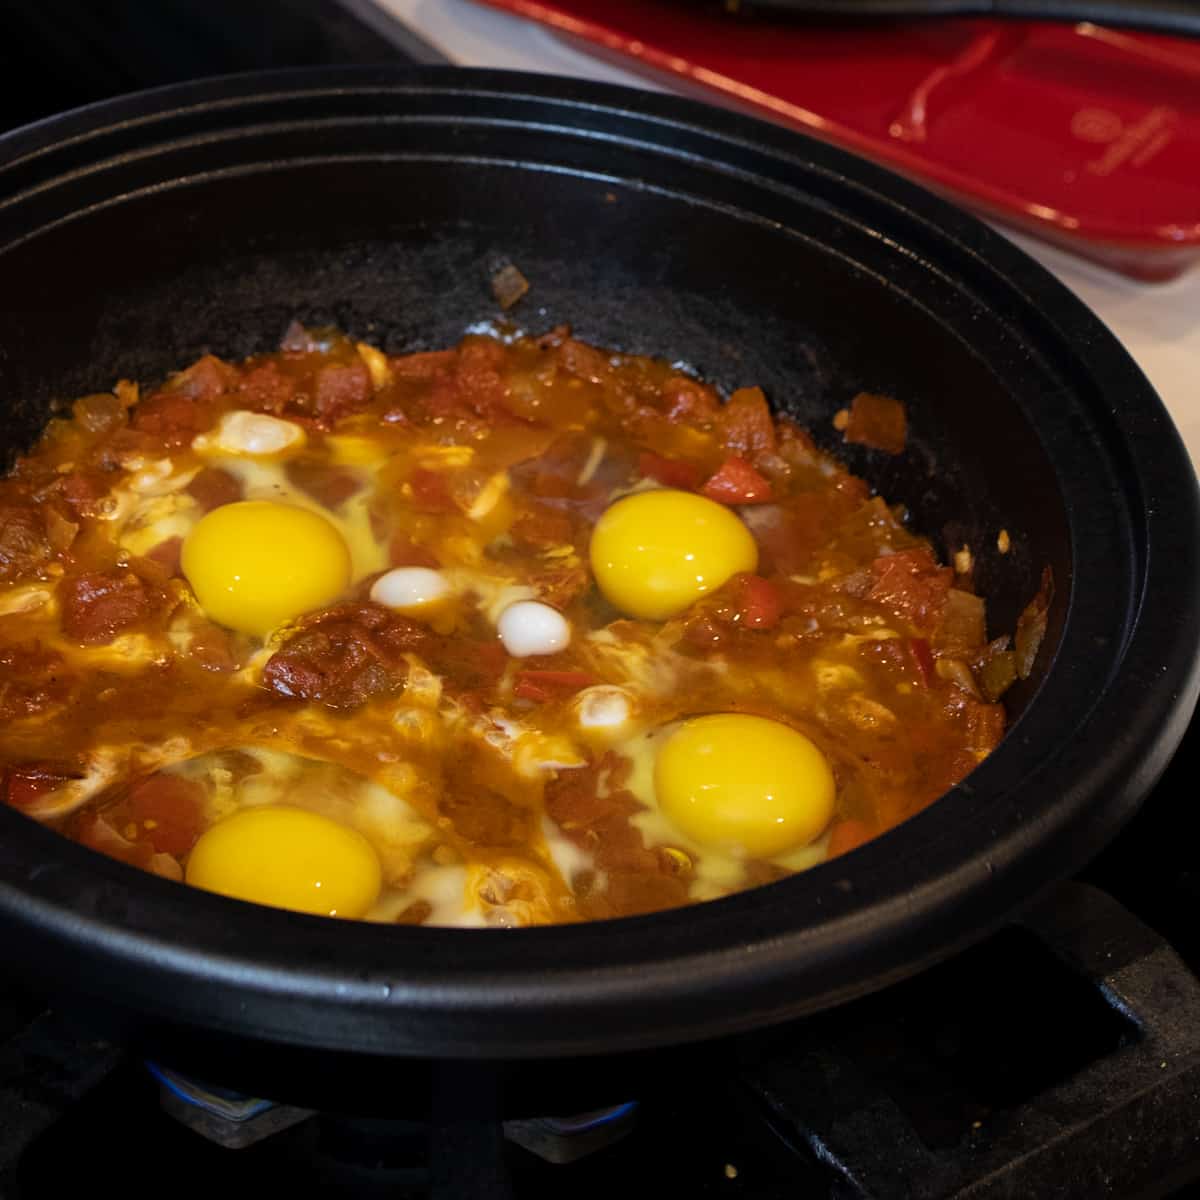 Four eggs freshly cracked on stewed tomatoes.